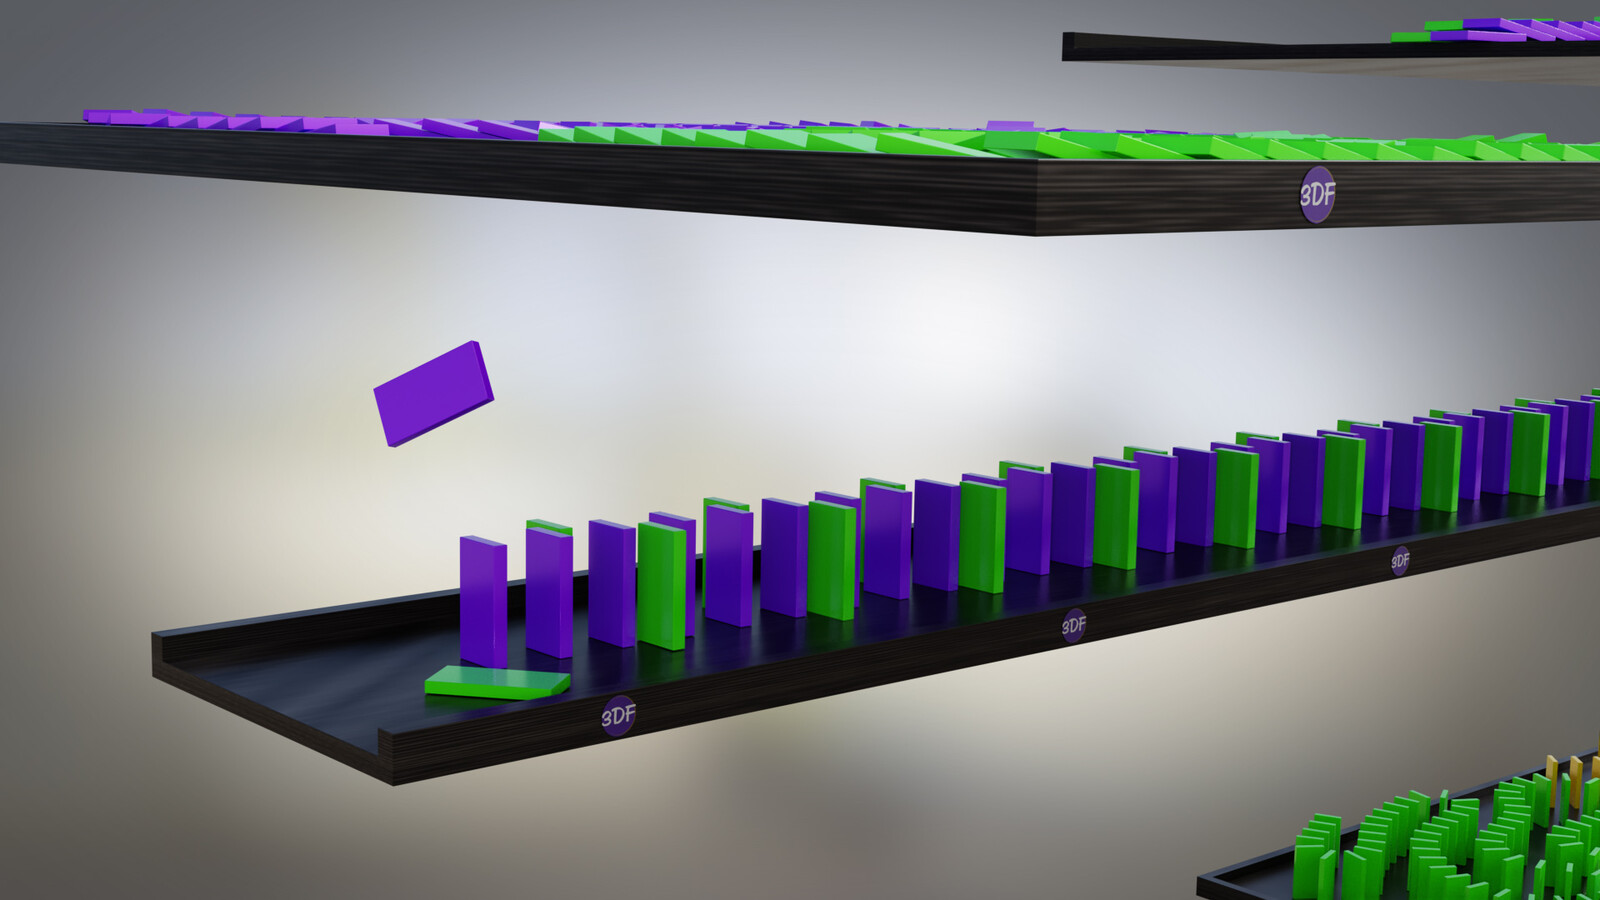 3D  Dominoes Falling with Balls mechanisms for transitions - V1 - Dynamics with Houdini